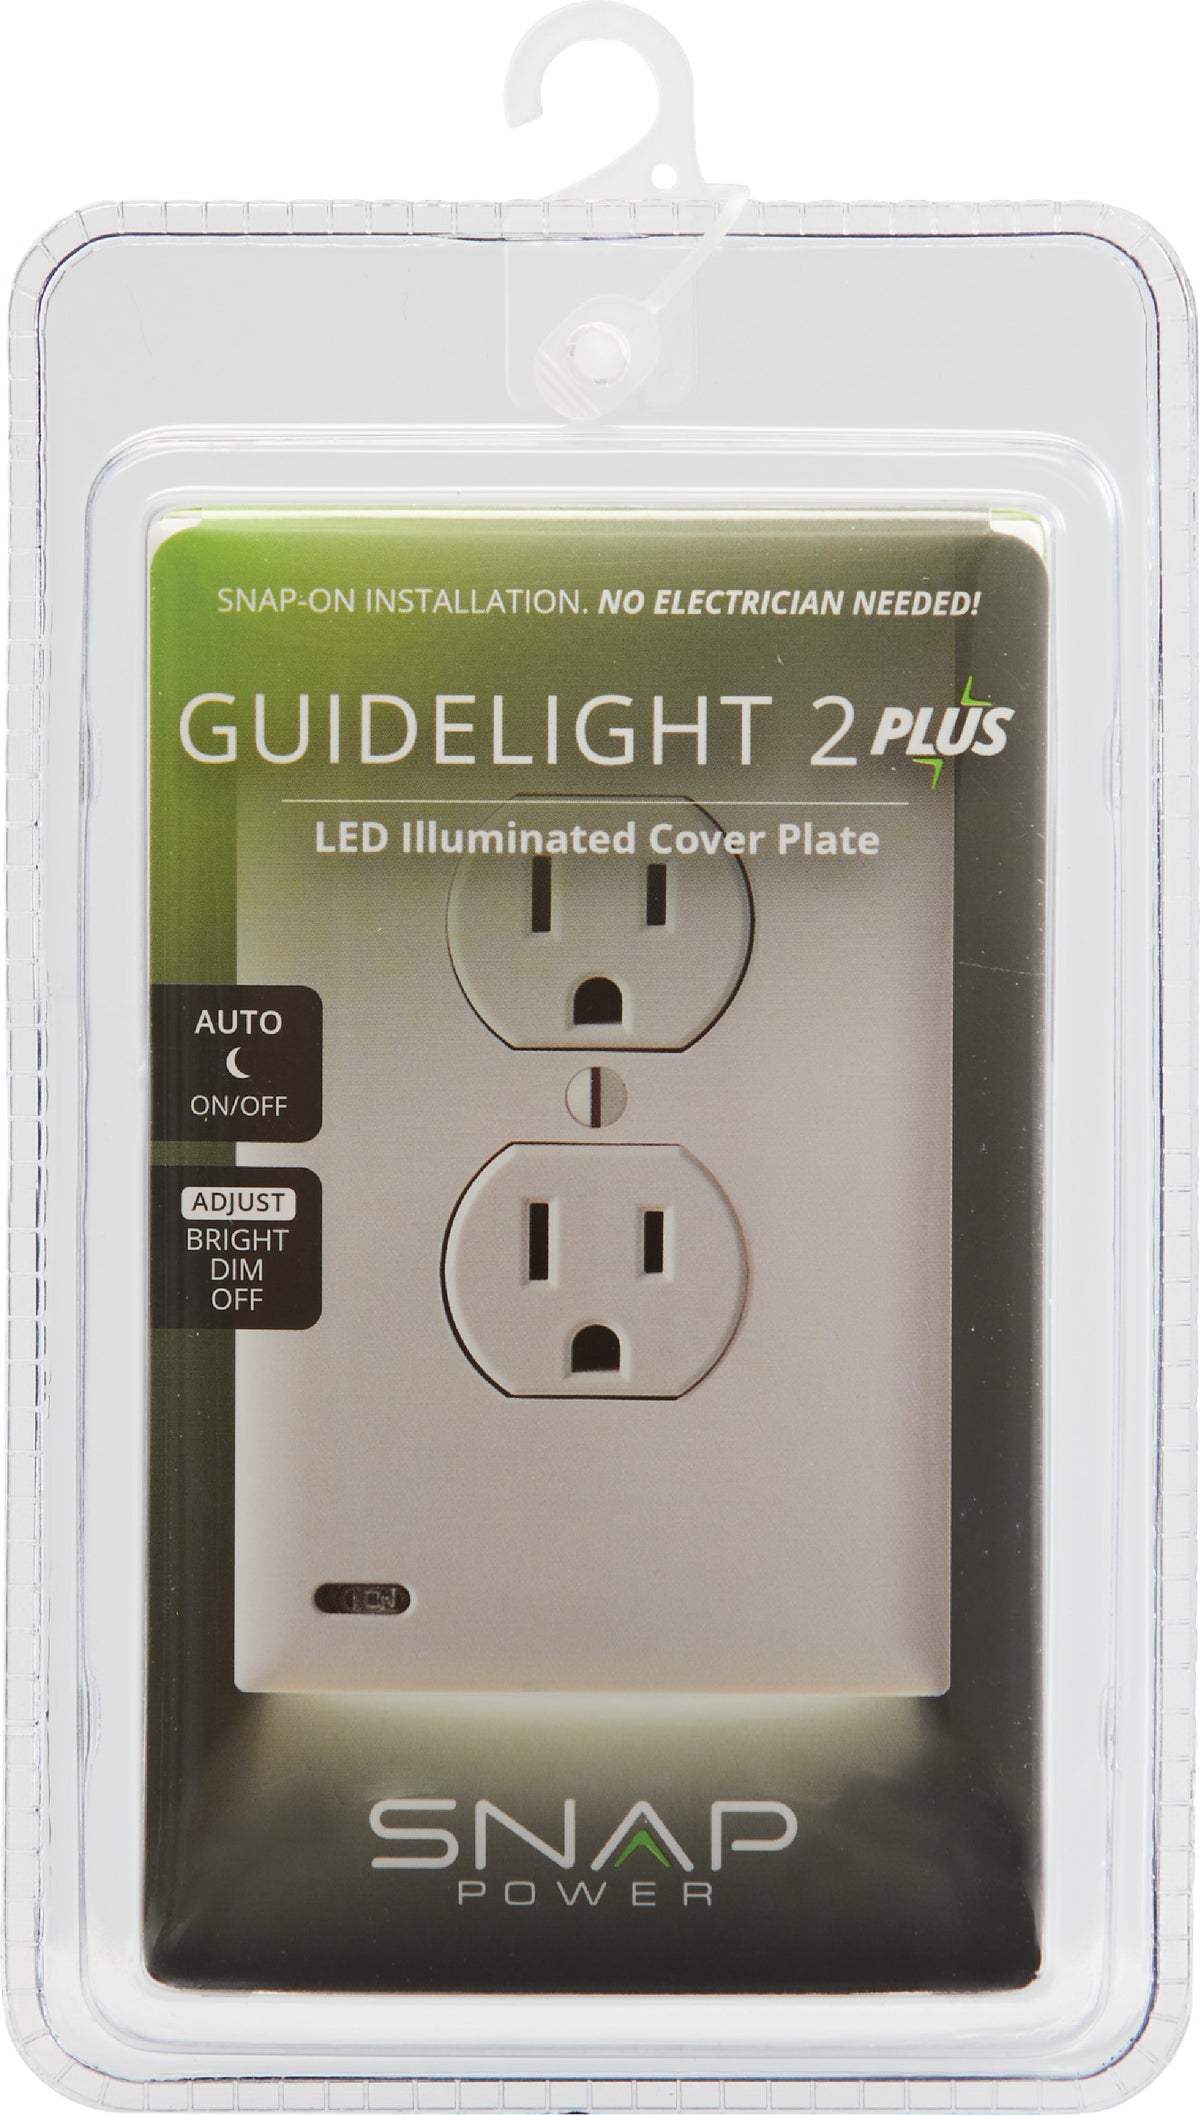 Buy SnapPower GuideLight 2 PLUS Outlet Wall Plate White